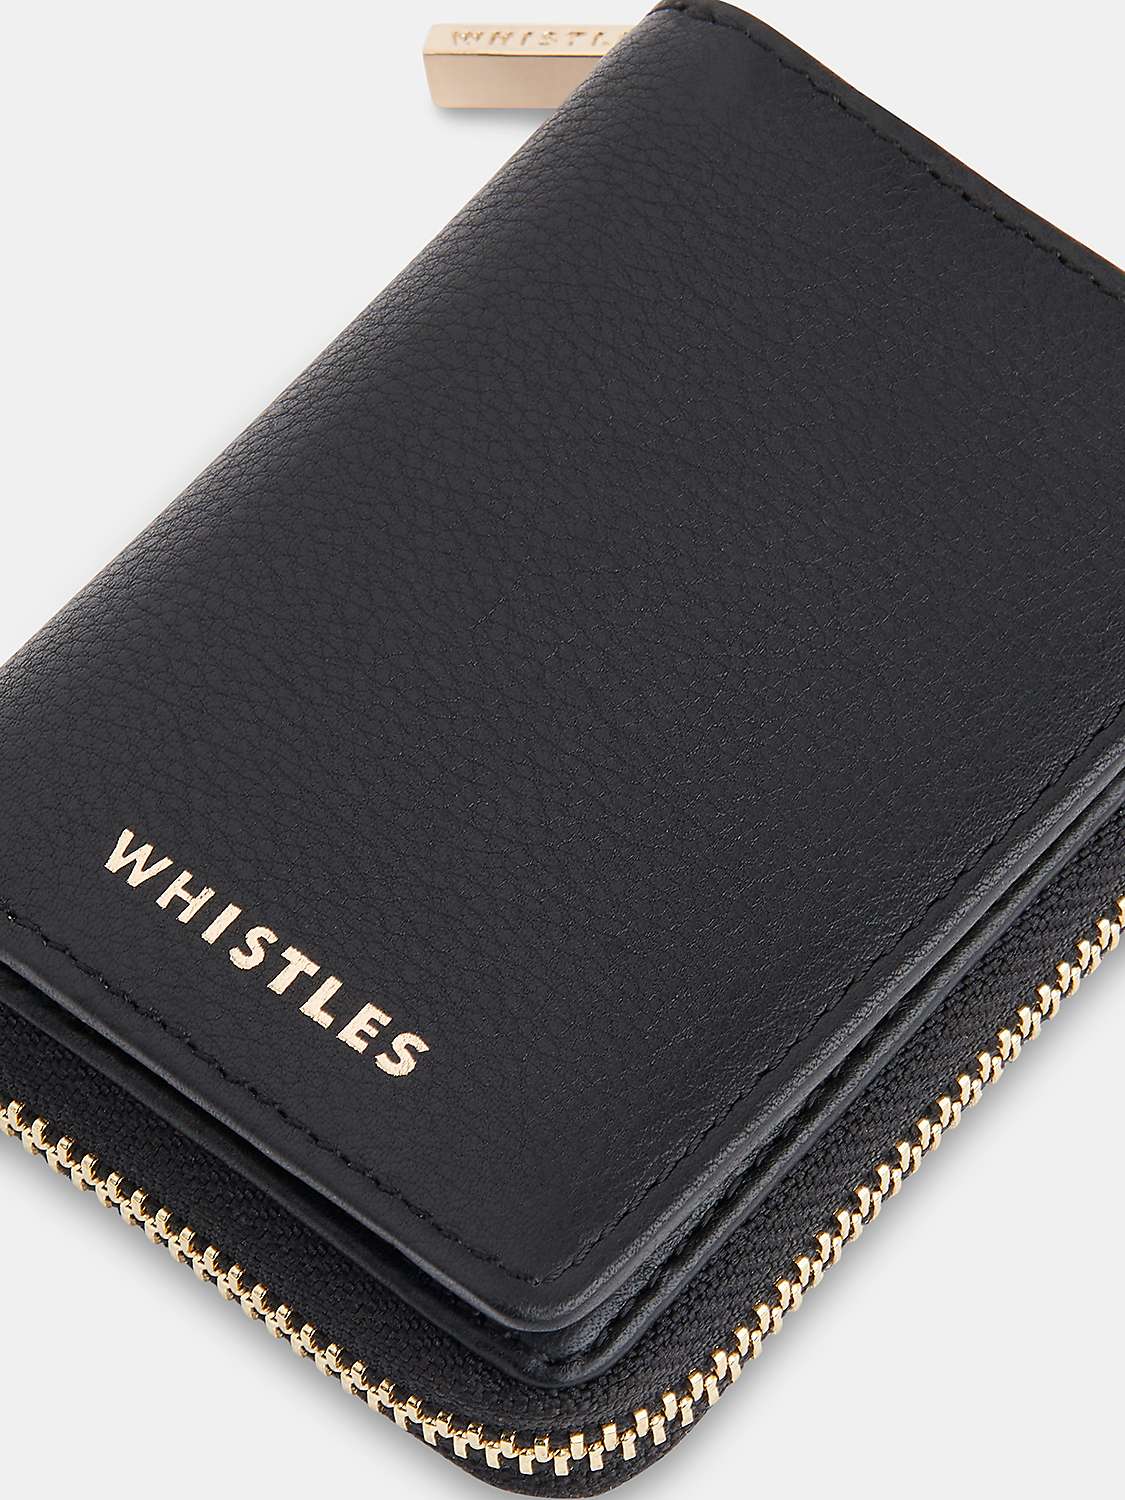 Buy Whistles Koa Compact Zip Around Leather Purse Online at johnlewis.com